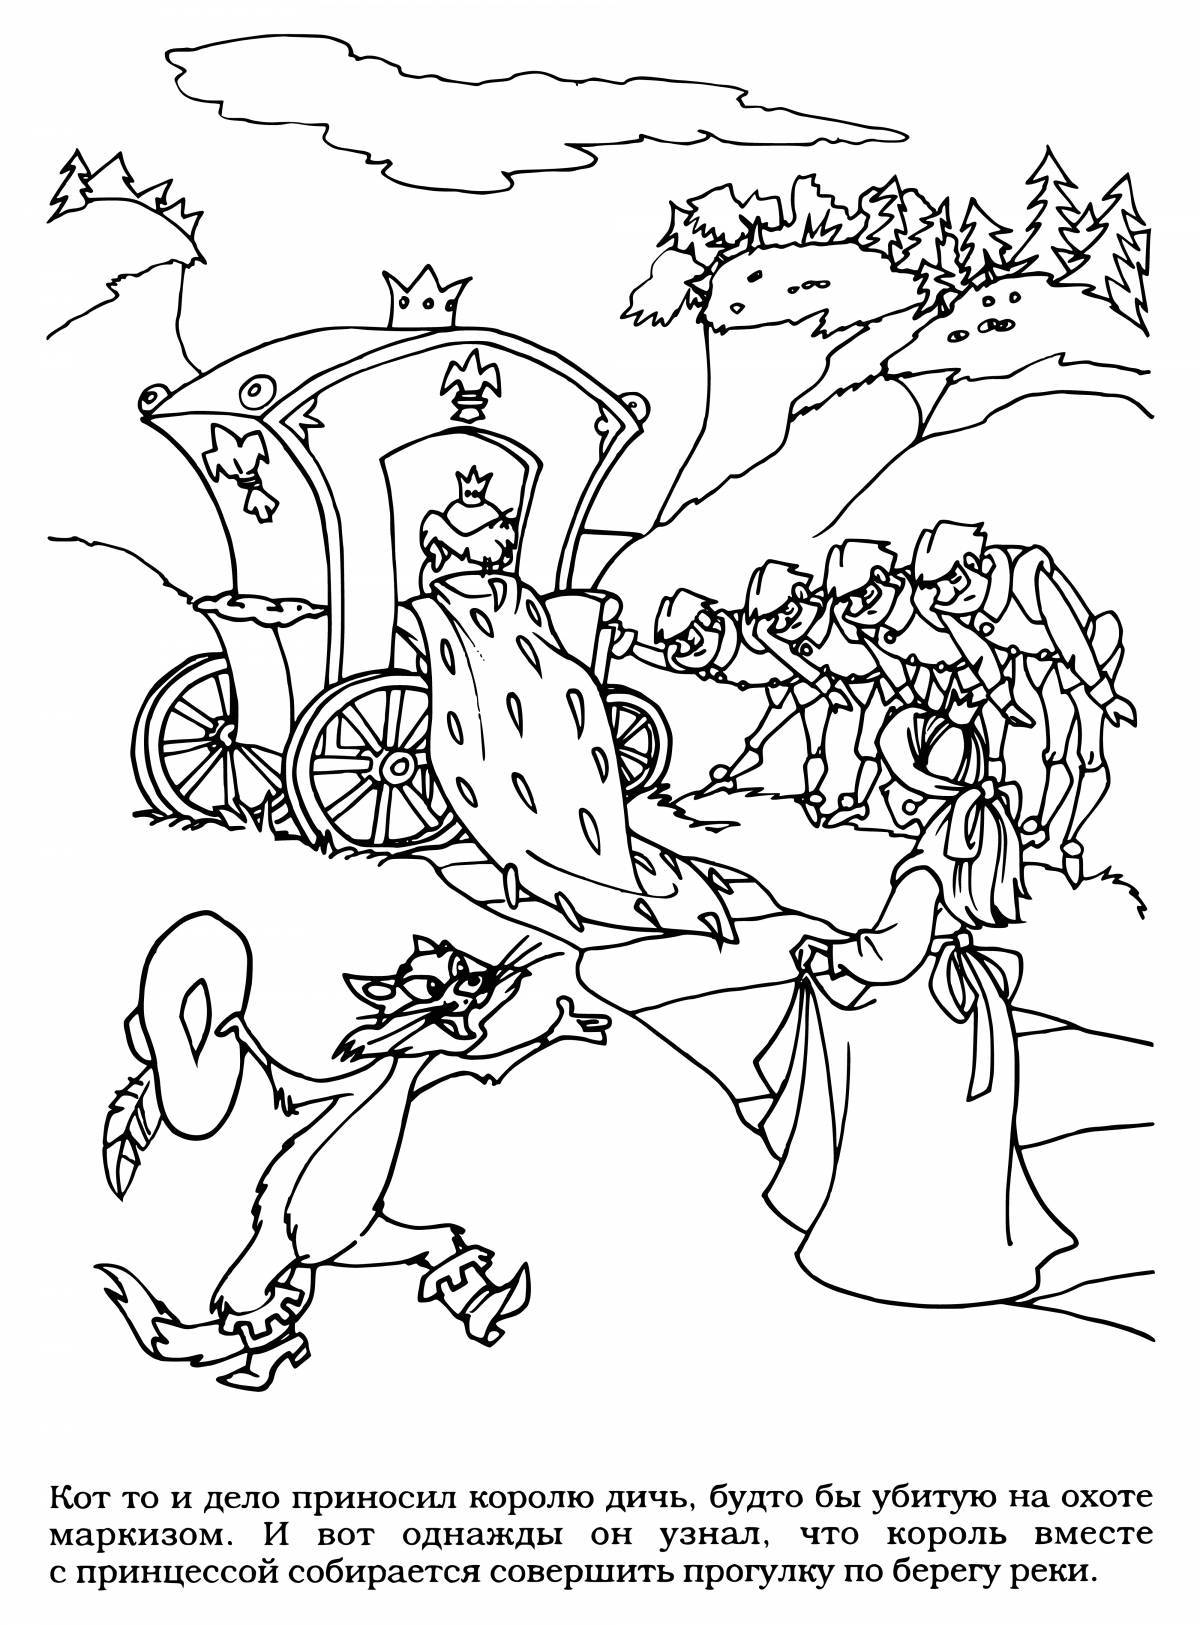 Charles Perrault's whimsical coloring book